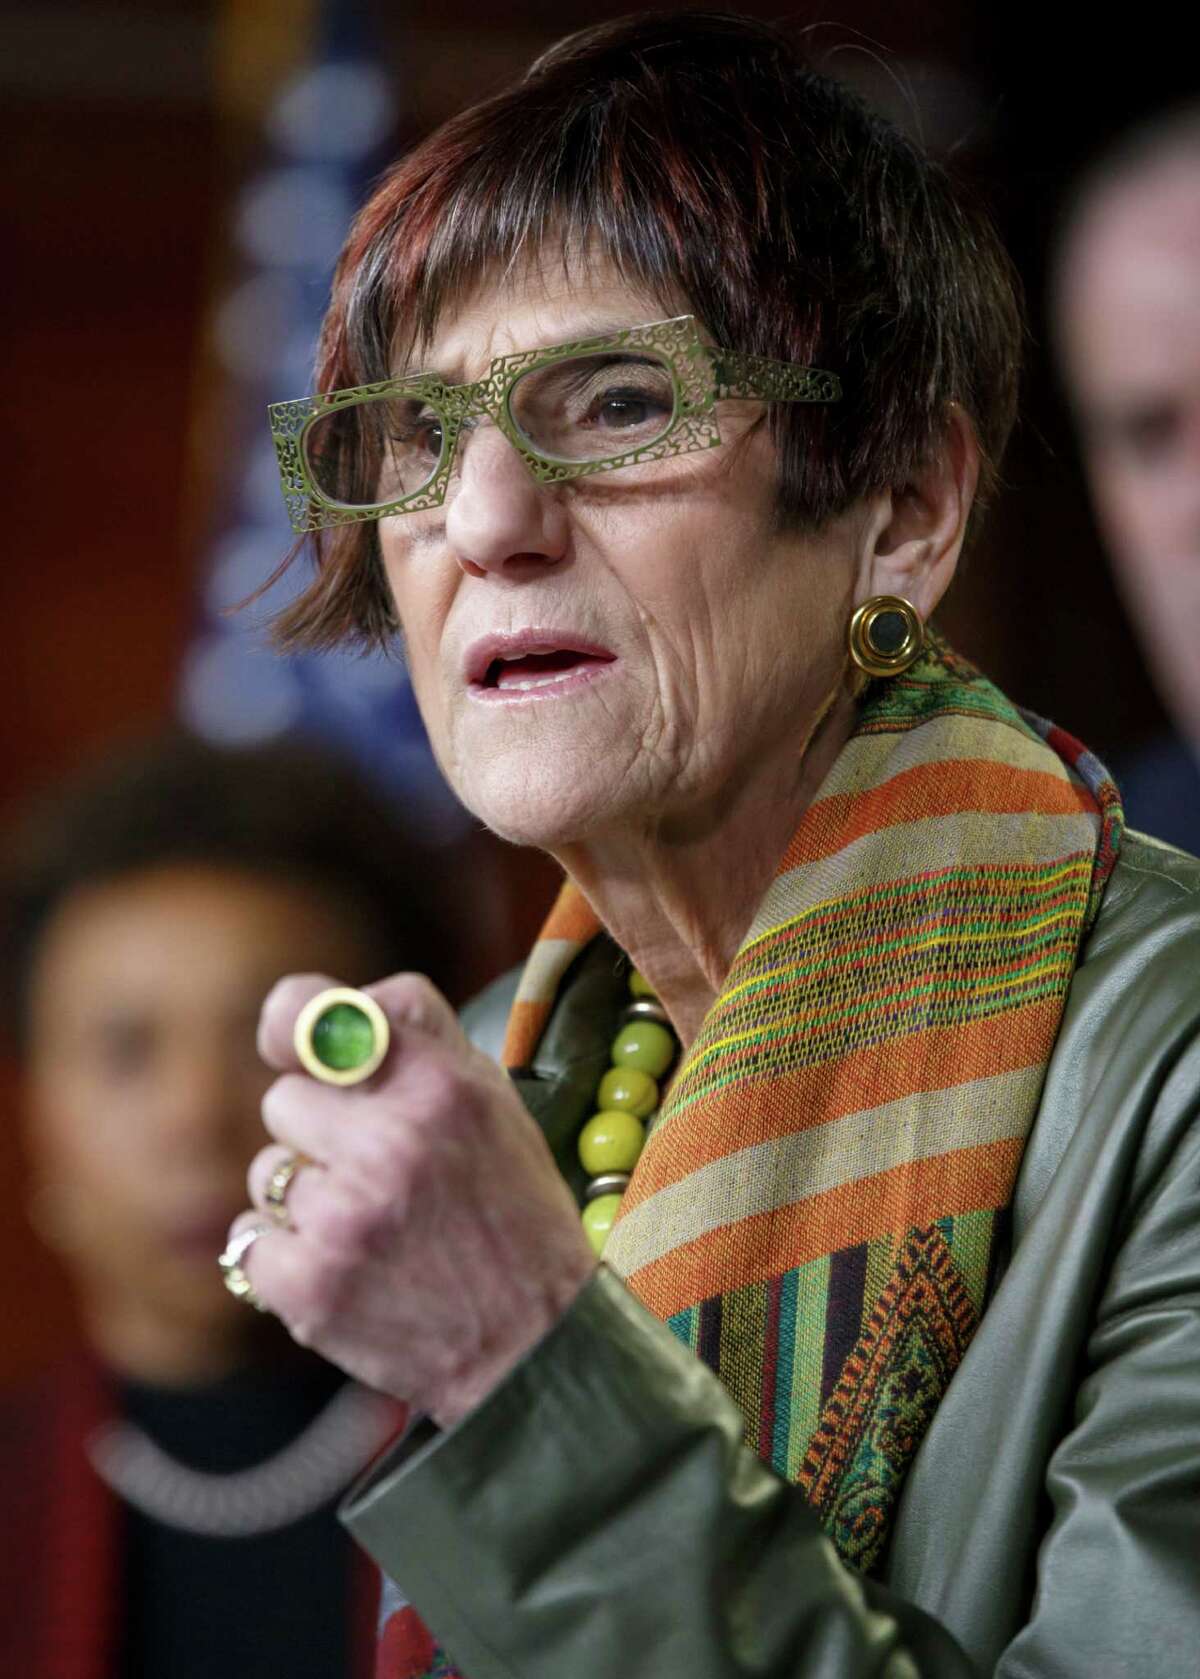 A Government Accountability Office report shows that Medicare "was not verifying network adequacy. That’s their job and they abdicated that responsibility," said U.S. Rep. Rosa DeLauro, D-New Haven.